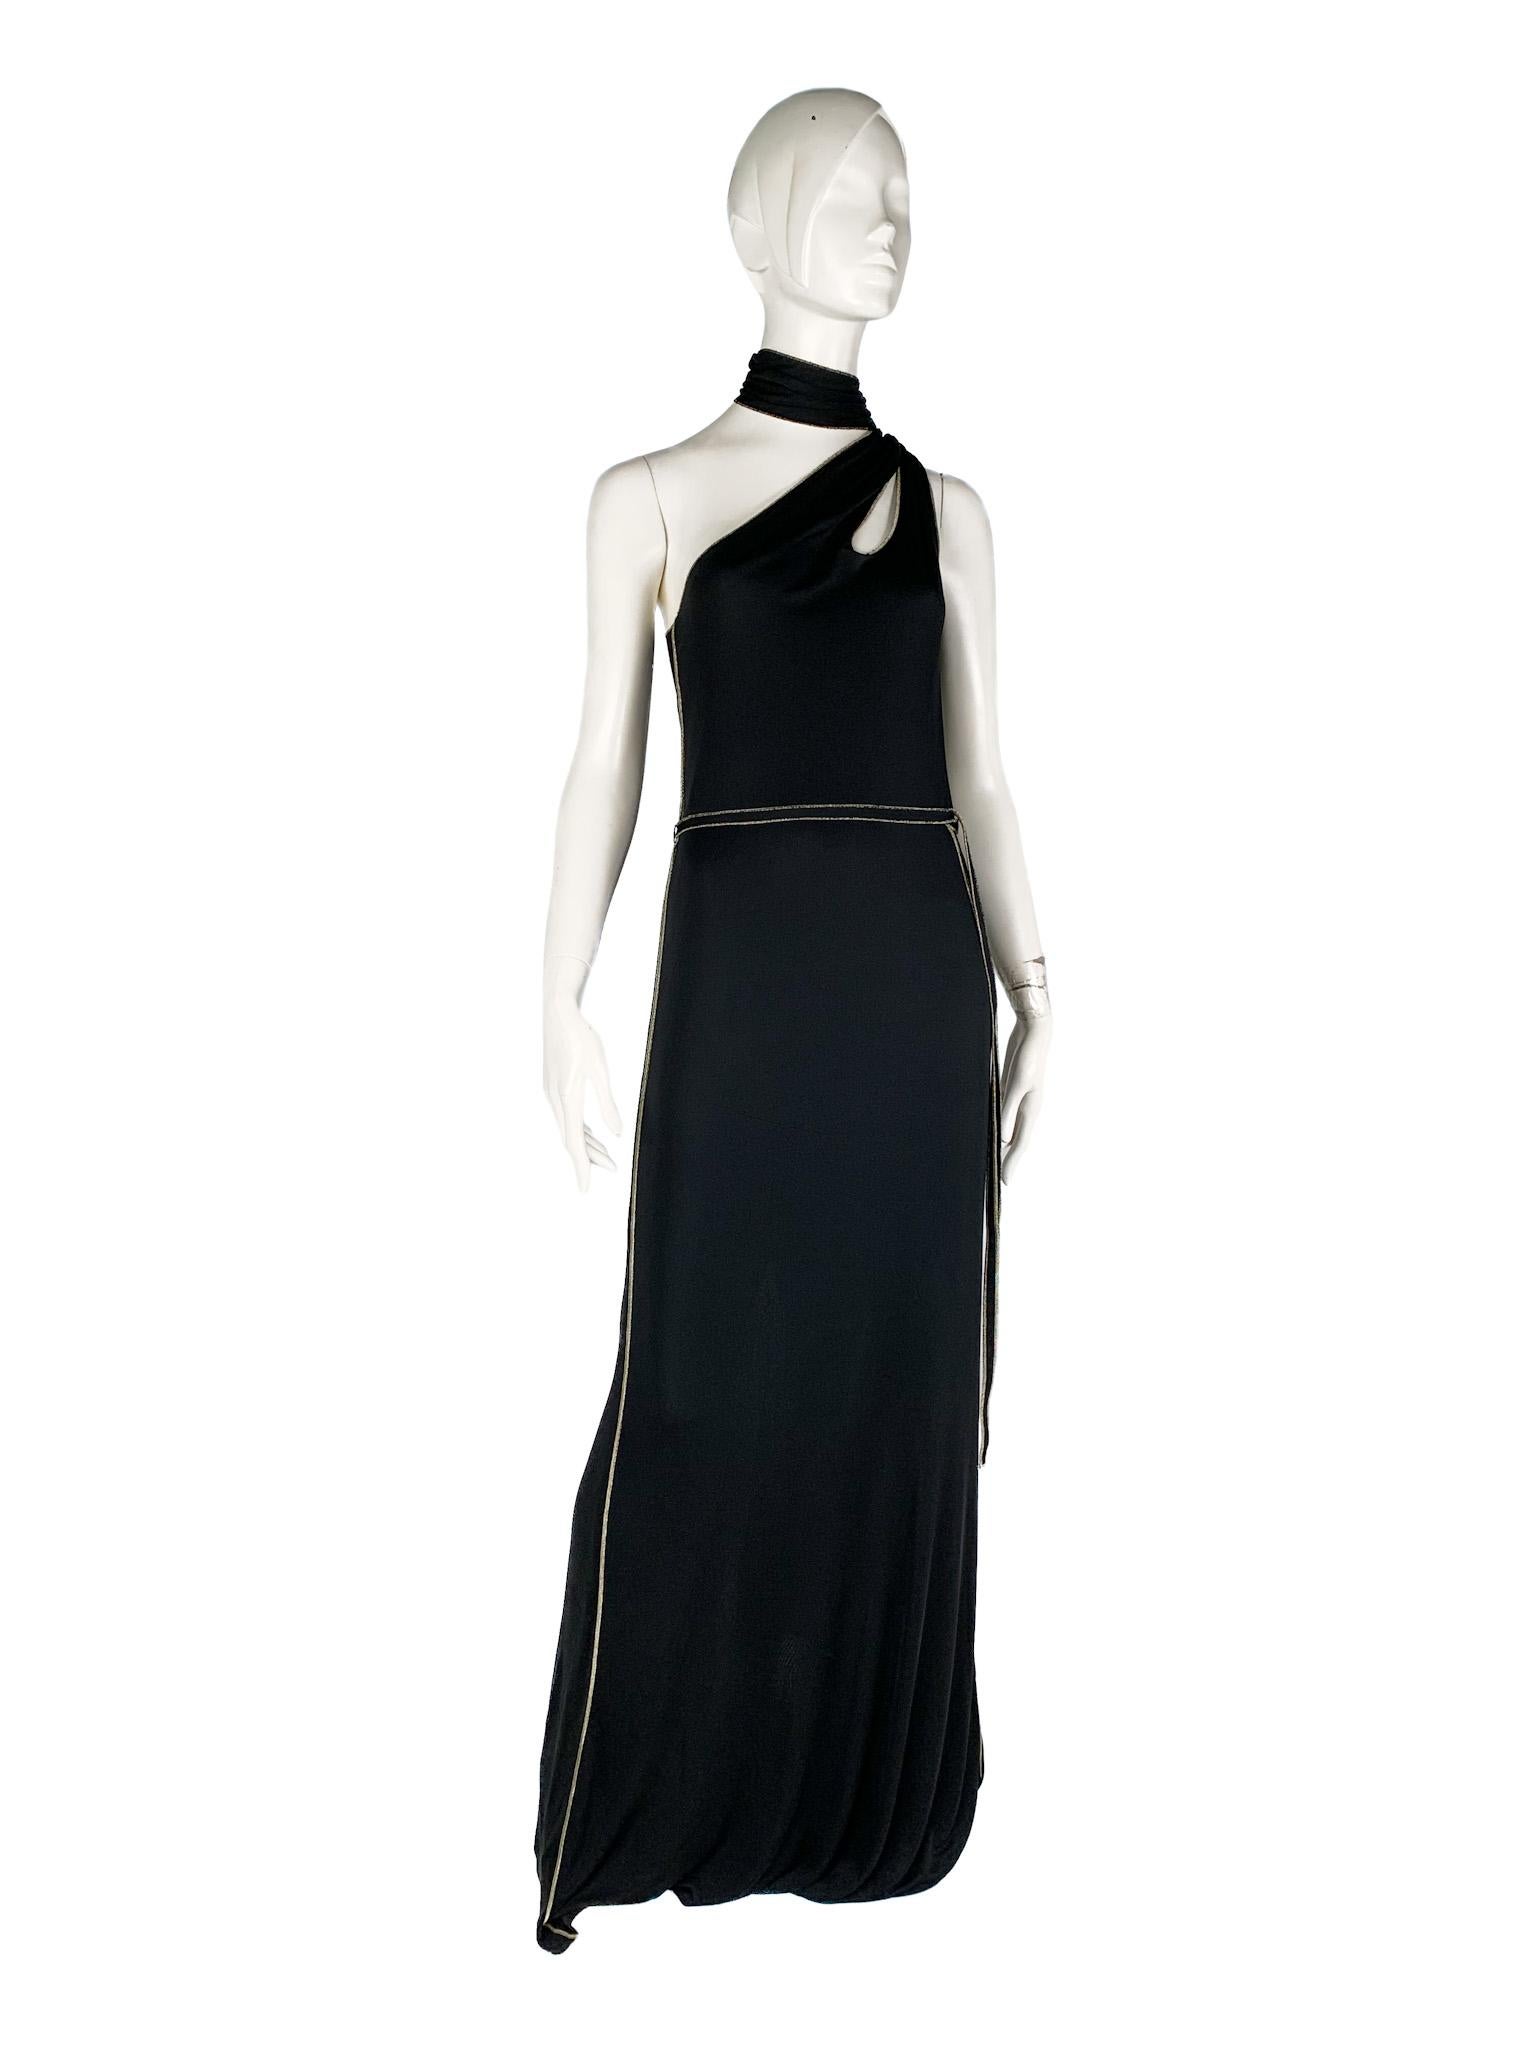 Women's Gucci 2006 One-Shoulder Gown with Fringed Scarves/Train, Cutouts, Gold Topstitch